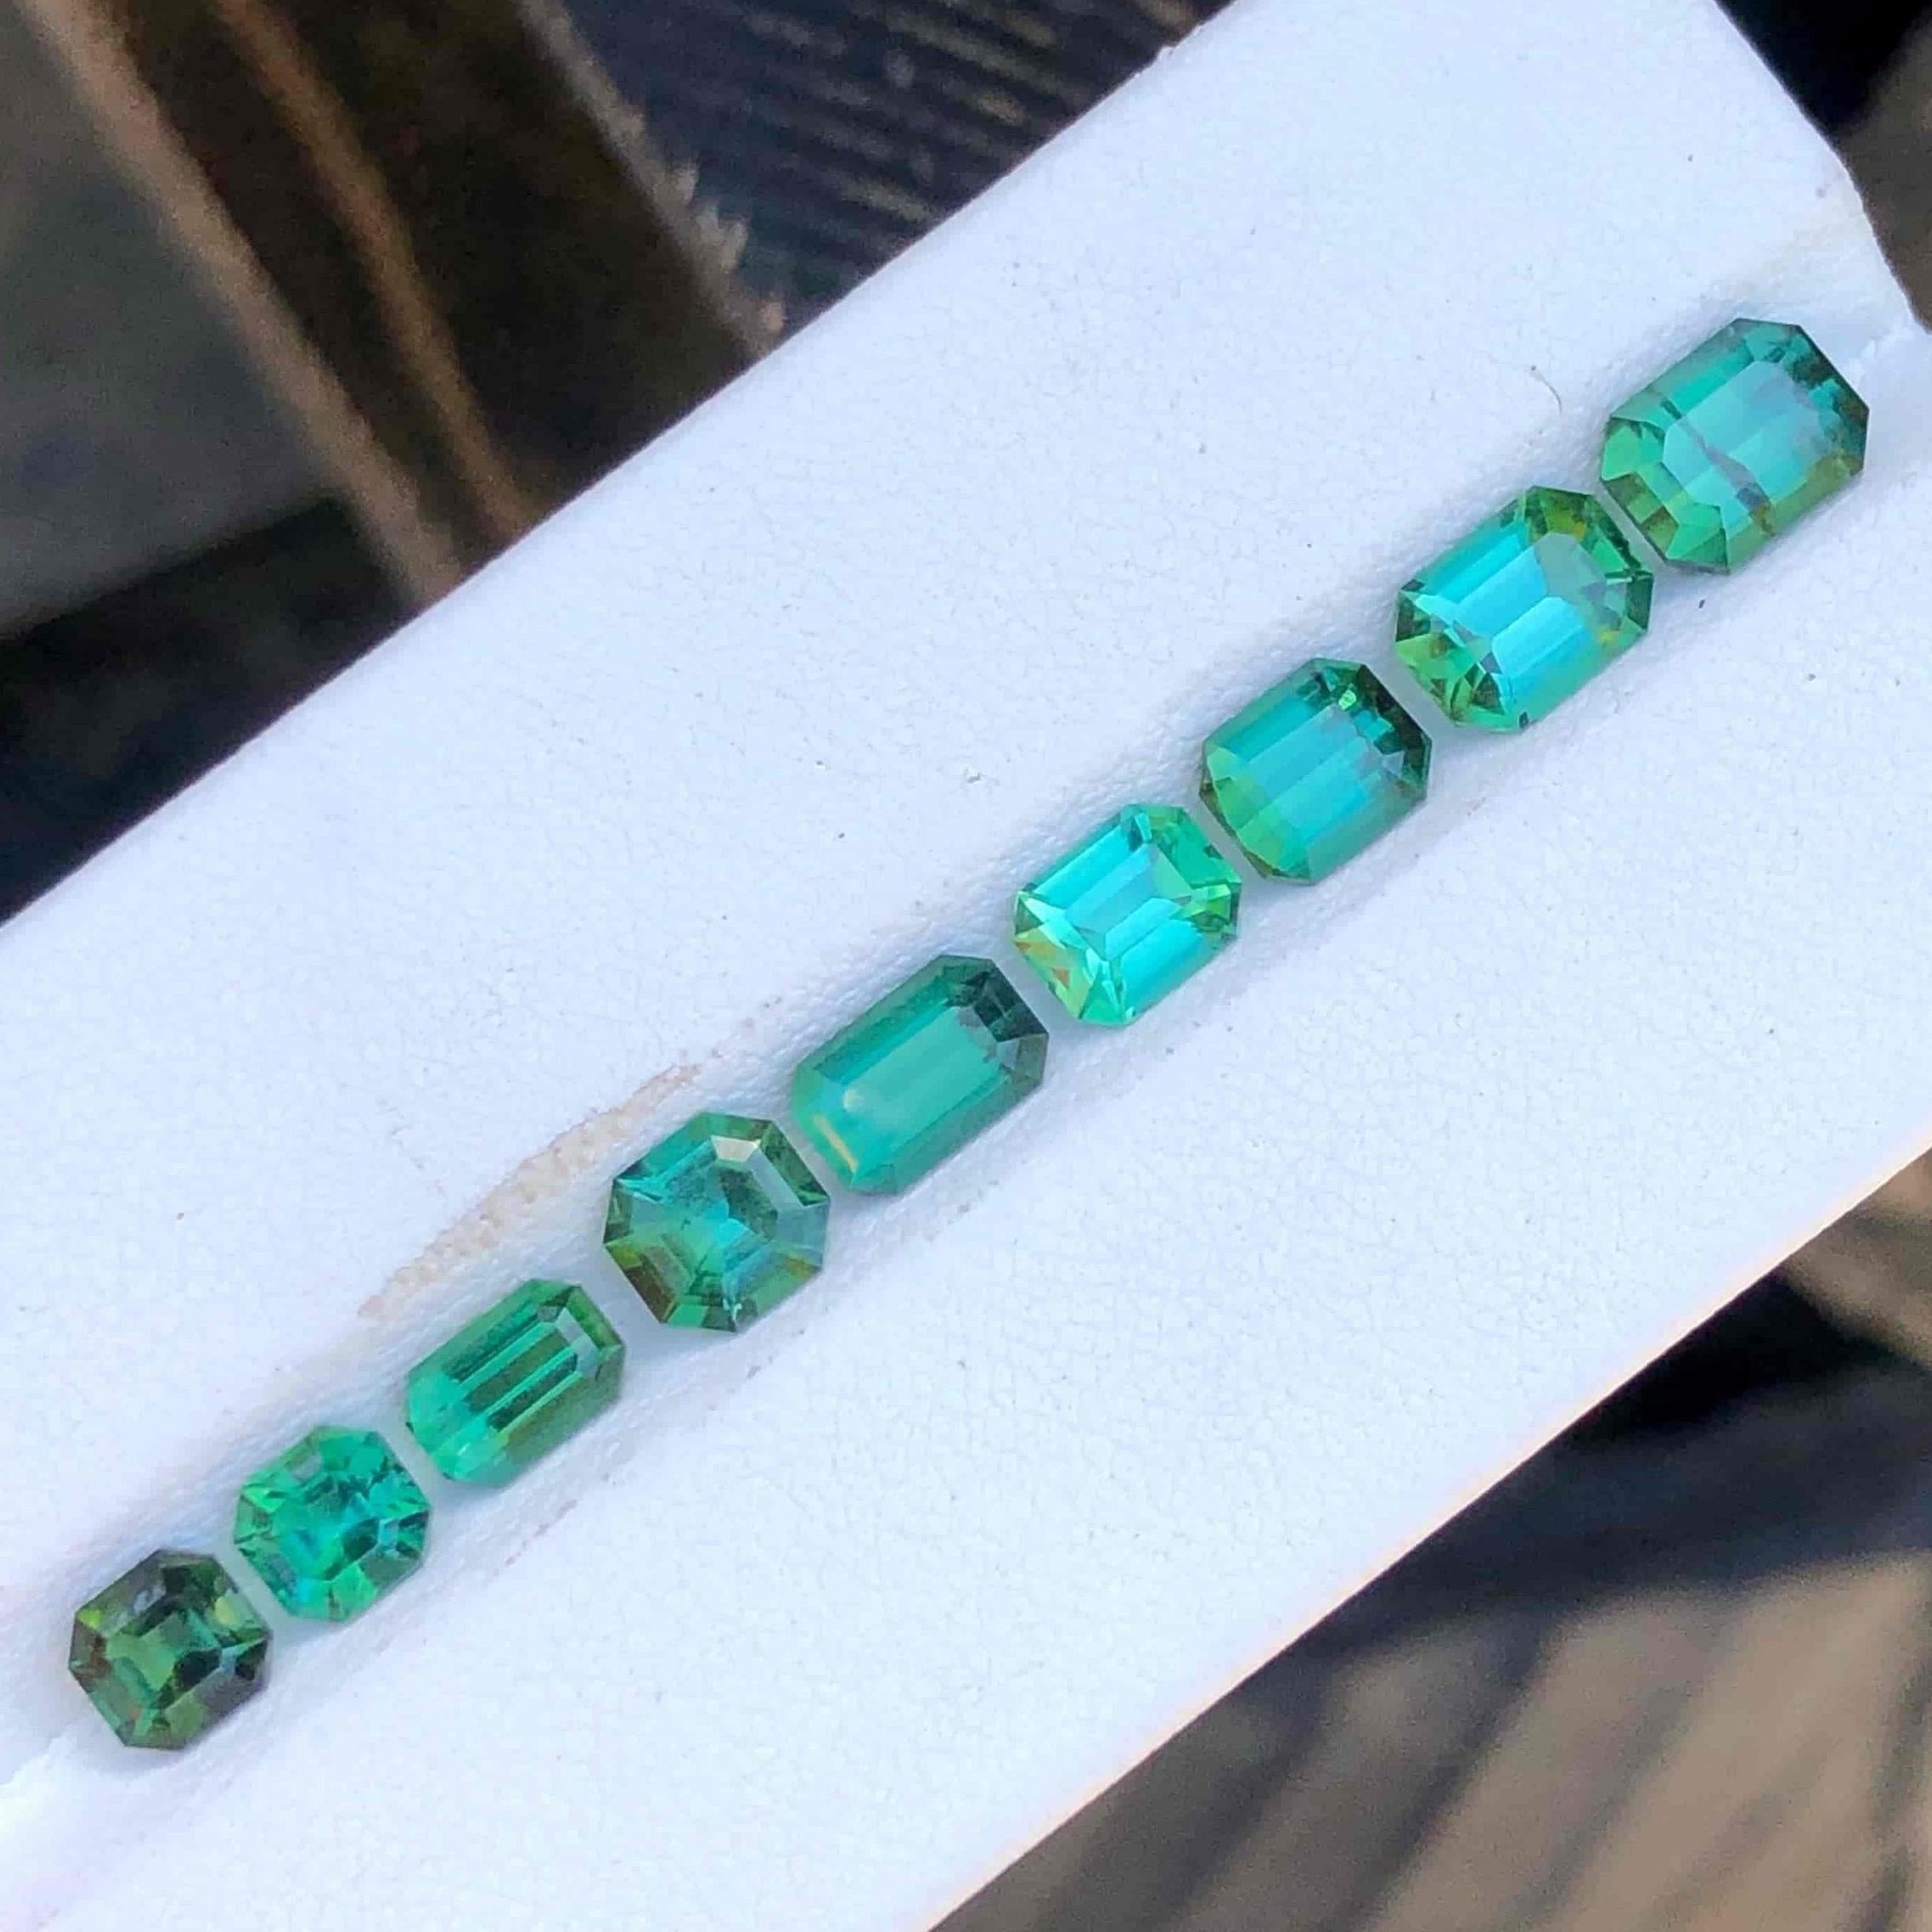 Gemstone Type Mint Green Tourmaline Gemstones Lot
Weight 7.45 carats
Weight Range	0.6 to 1.30 carat
Clarity SI to Eye clean
Origin Afghanistan
Treatment None




his lot features natural, loose tourmaline gems that boast a captivating mint green